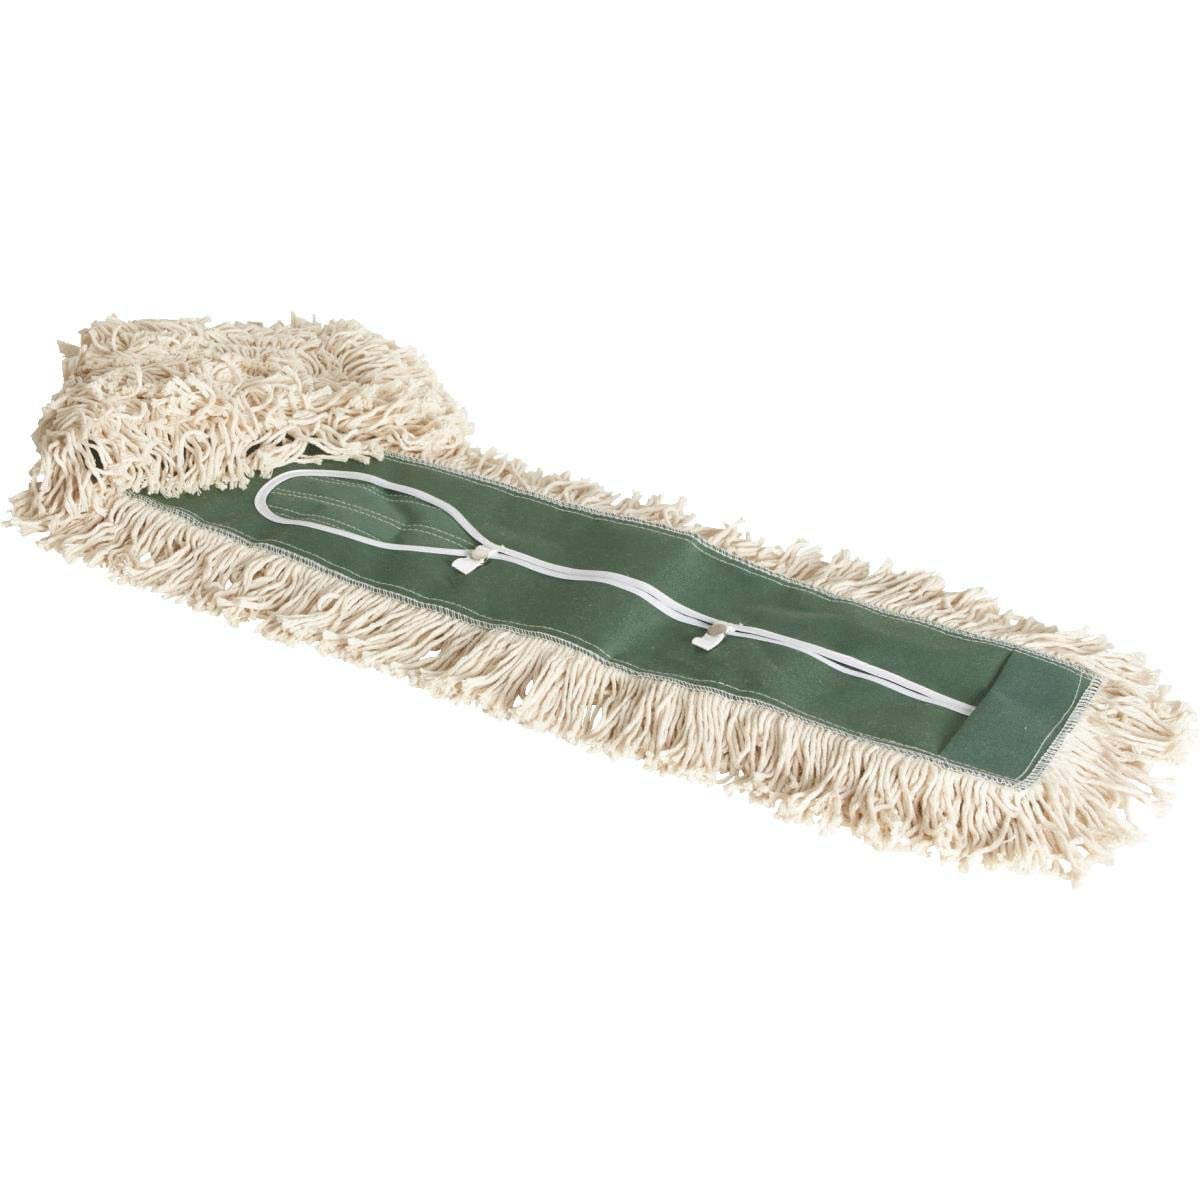 Quickie Bulldozer 24" Dust Mop Cotton Replacement Refill Head 0694 